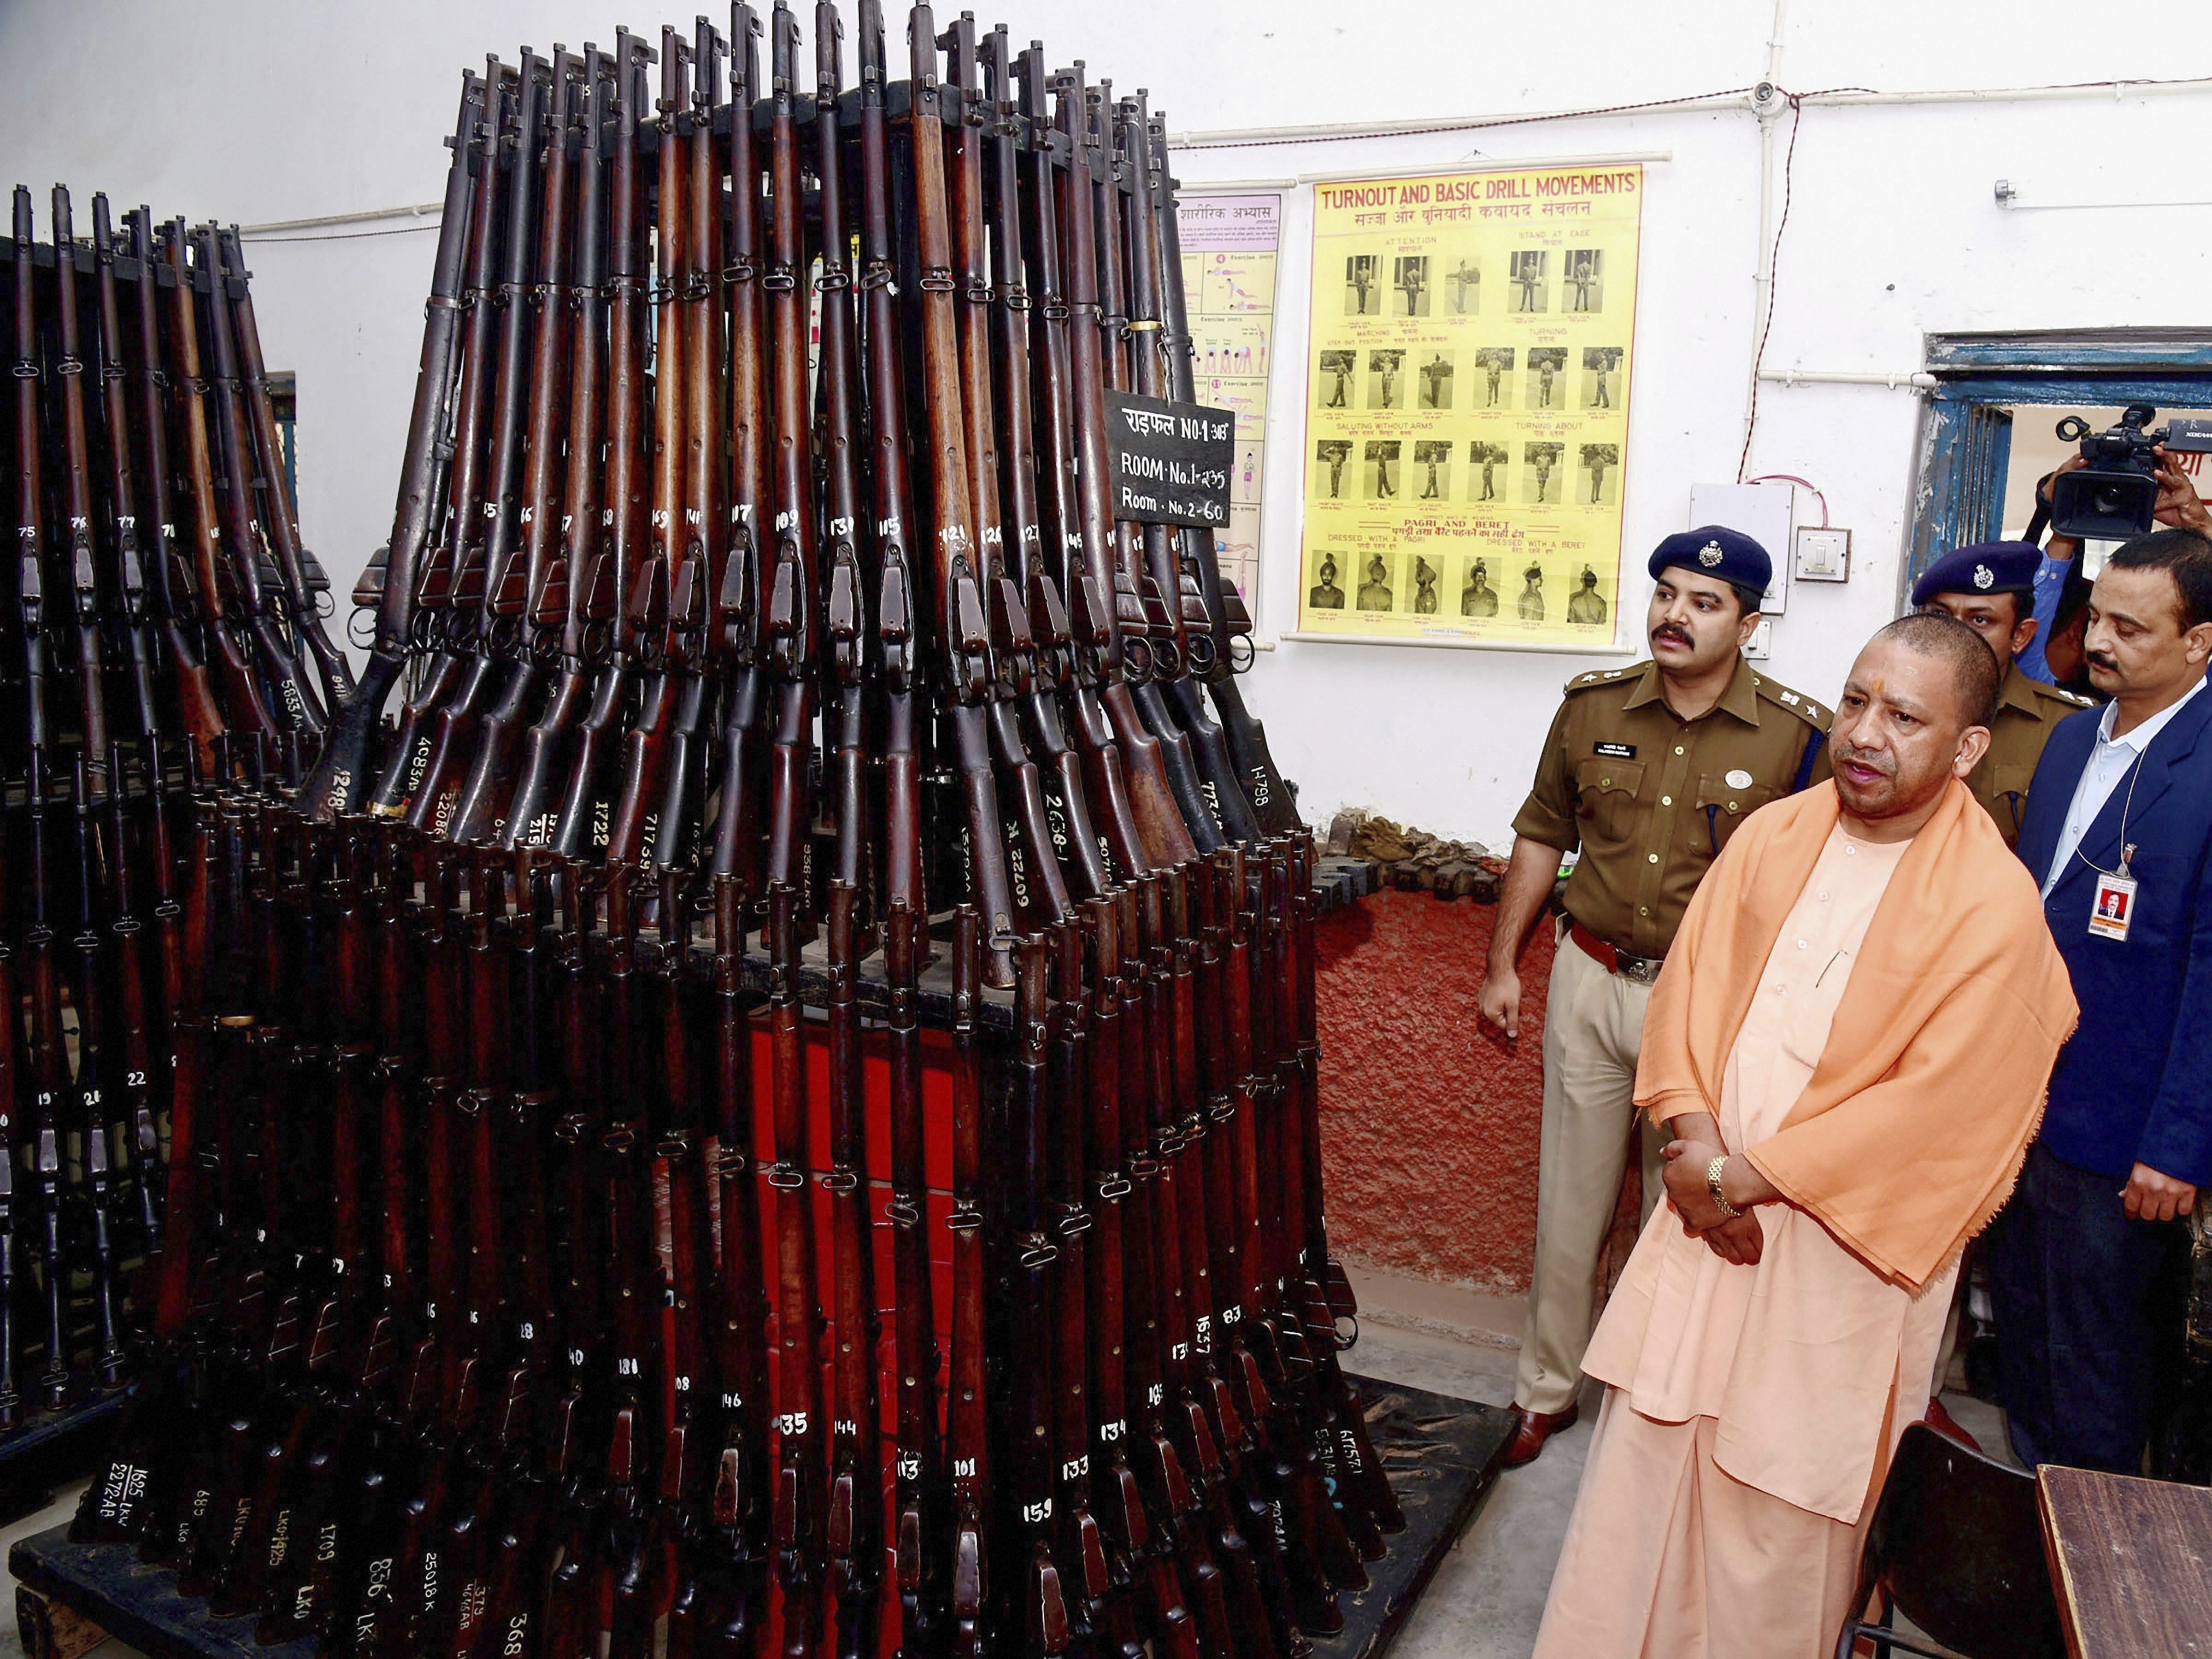 ttar Pradesh Chief Minister Yogi Adityanath inspects weapons during a surprise visit to Police Lines, in Lucknow - PTI